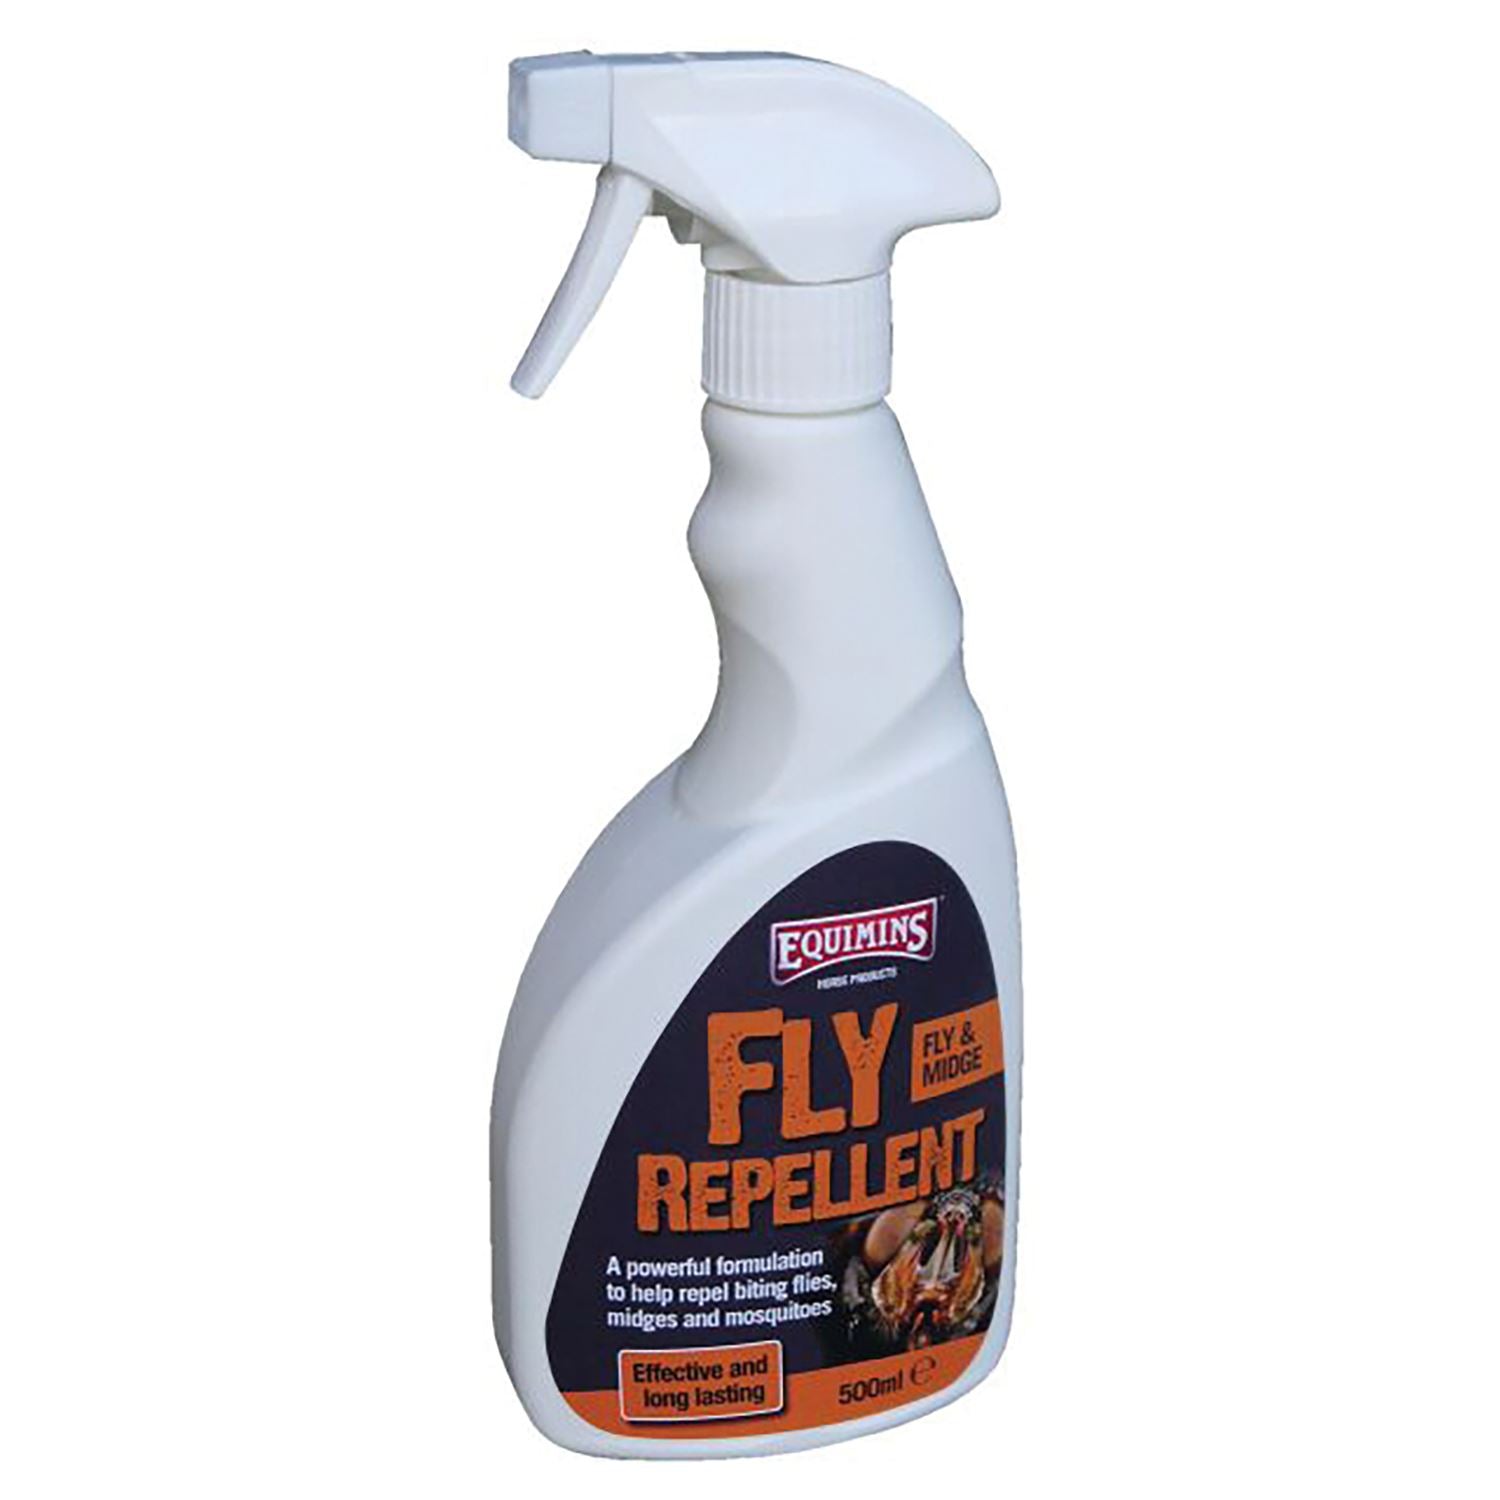 Equimins Fly Repellent Spray: A blend of essential oils for effective fly protection